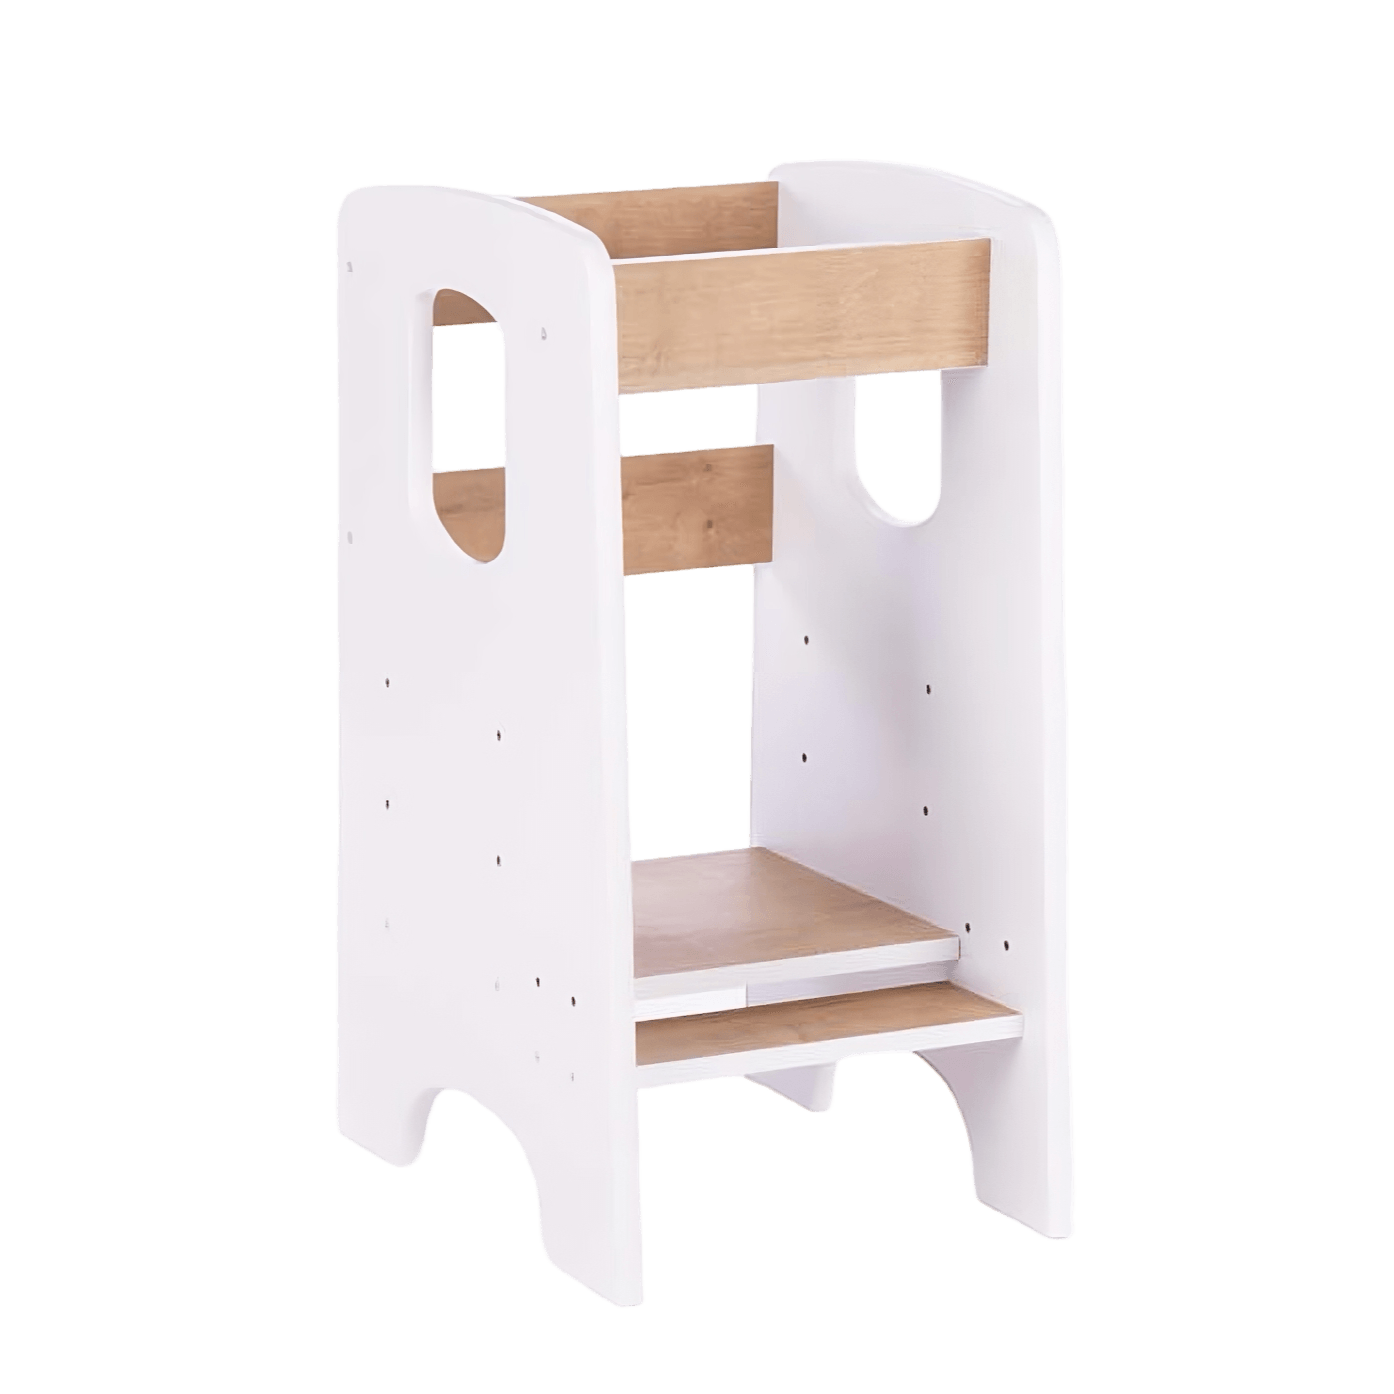 A children's kitchen tower, also known as a kitchen helper stool, designed to allow a child to reach kitchen surfaces safely. The stool has a white frame with natural wood steps and rails, standing on a white background.